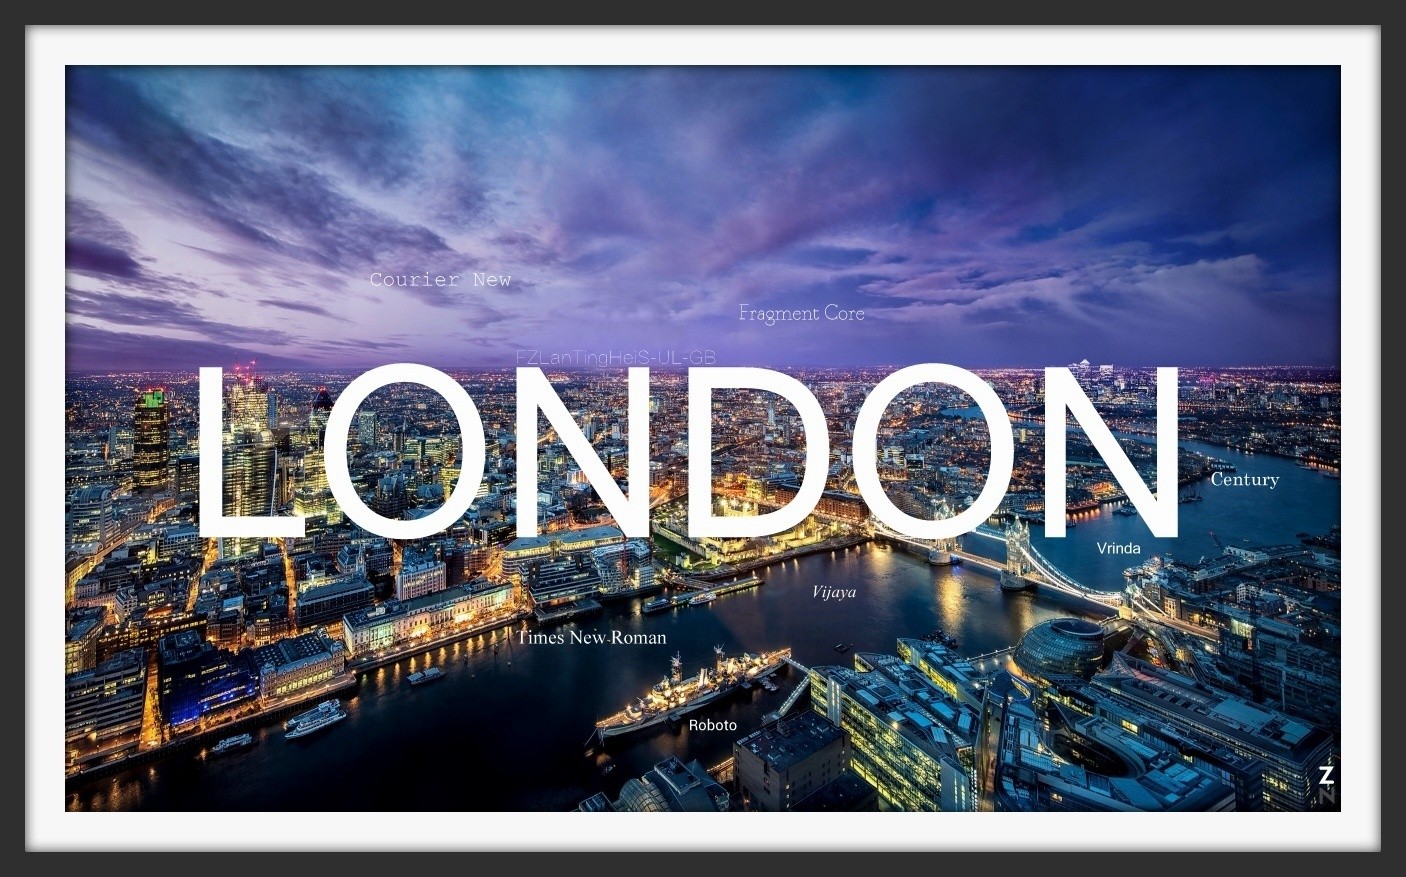 General 1406x877 street blurred solid color typography cityscape text London